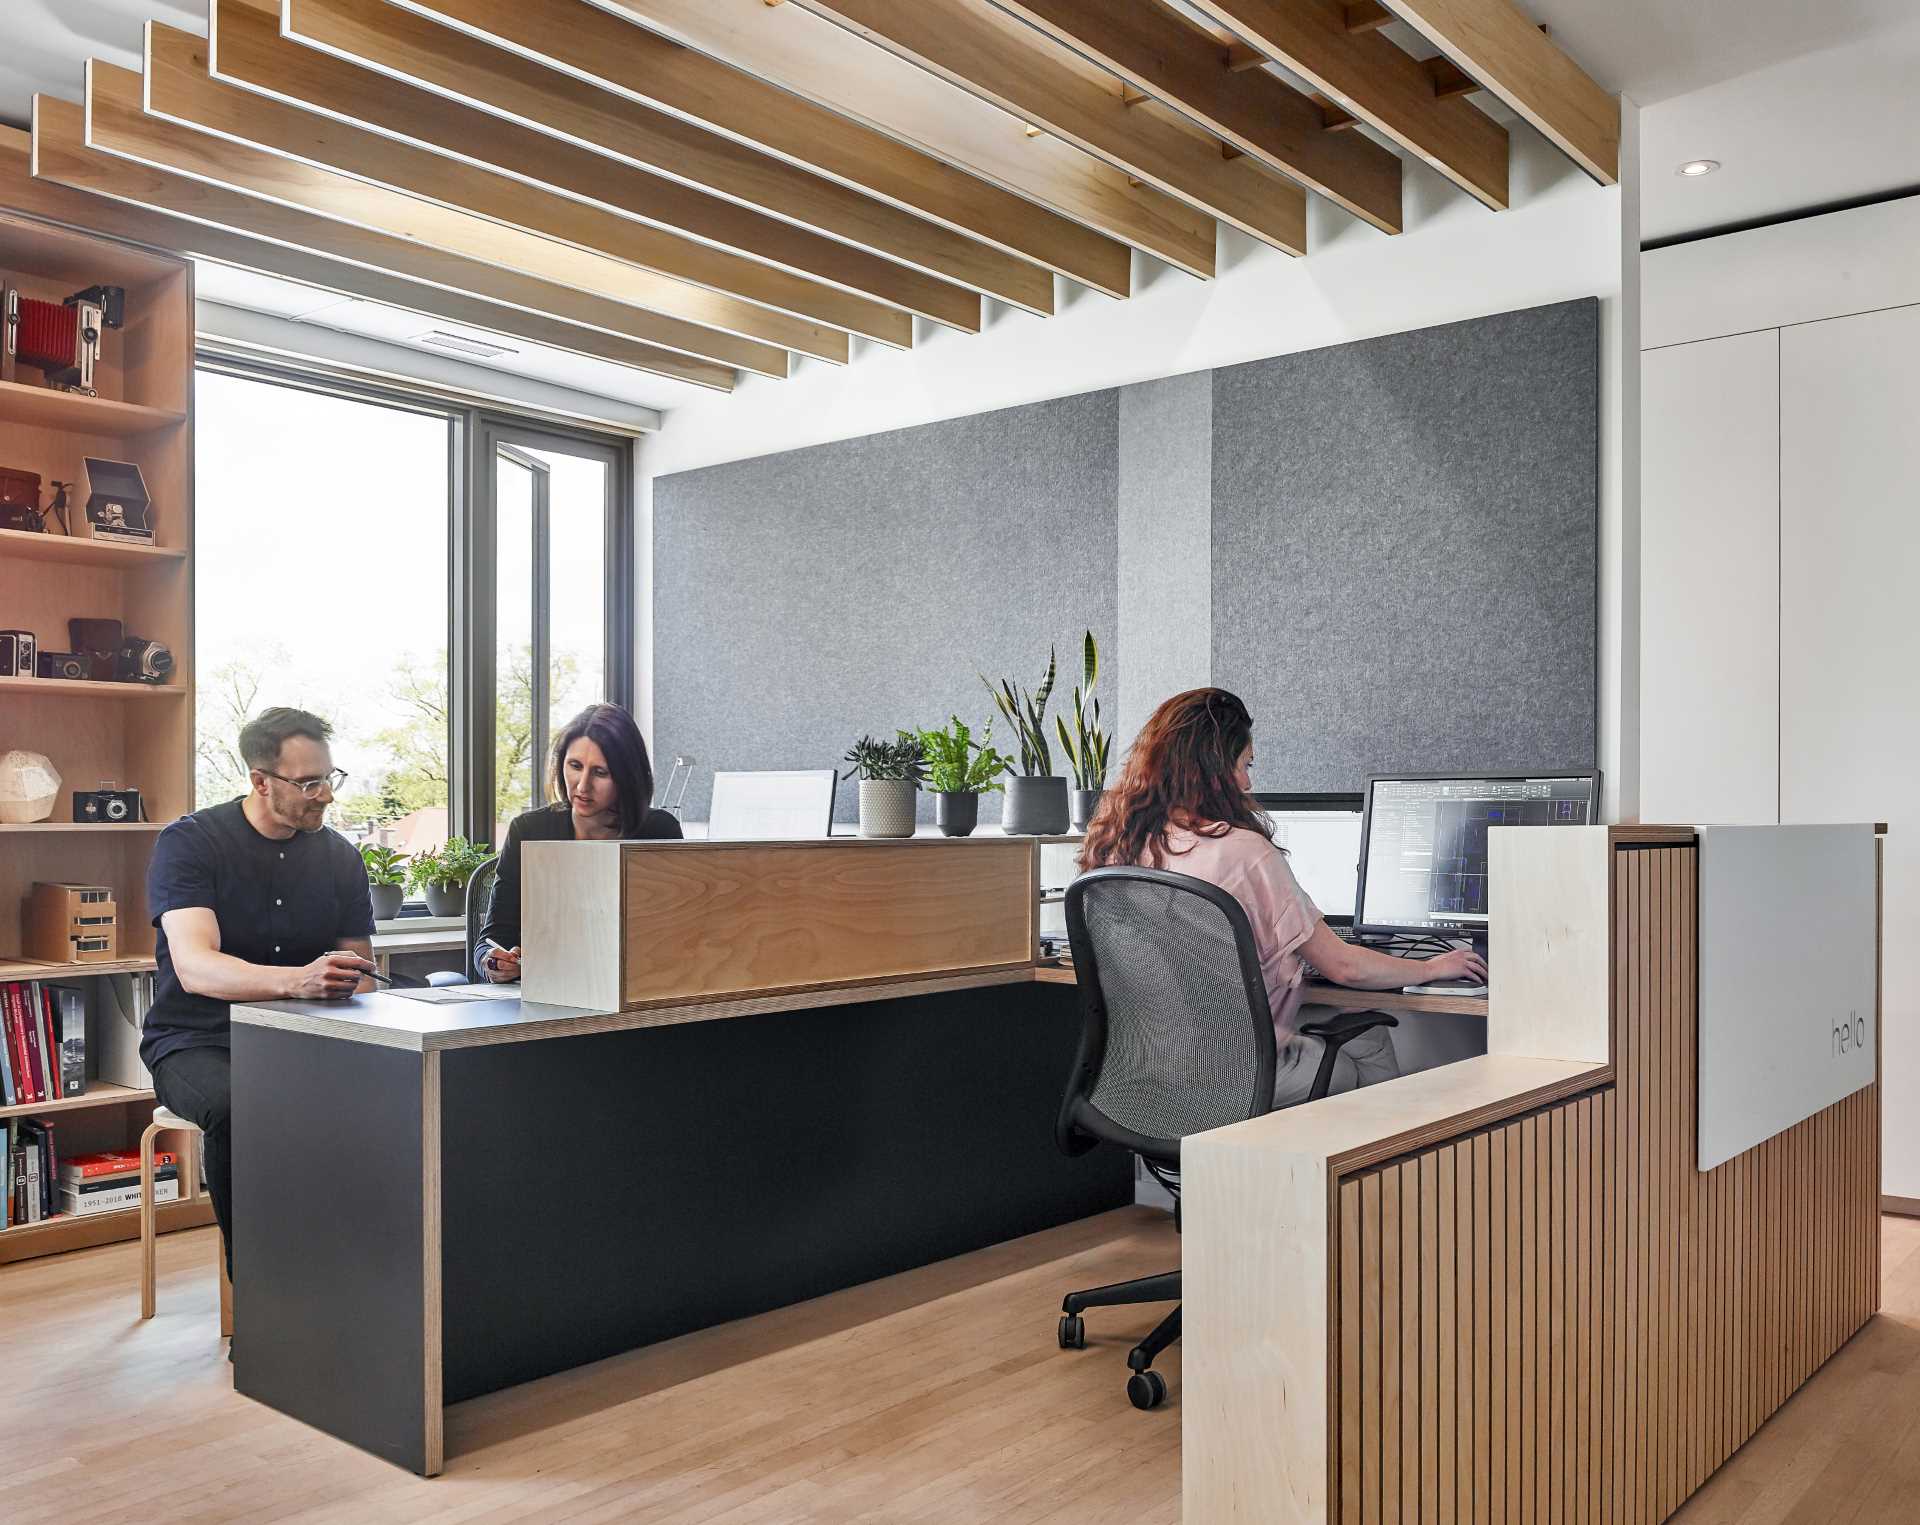 The grey wall and ceiling-mounted eco-felt panels provide acoustical benefits in this office.